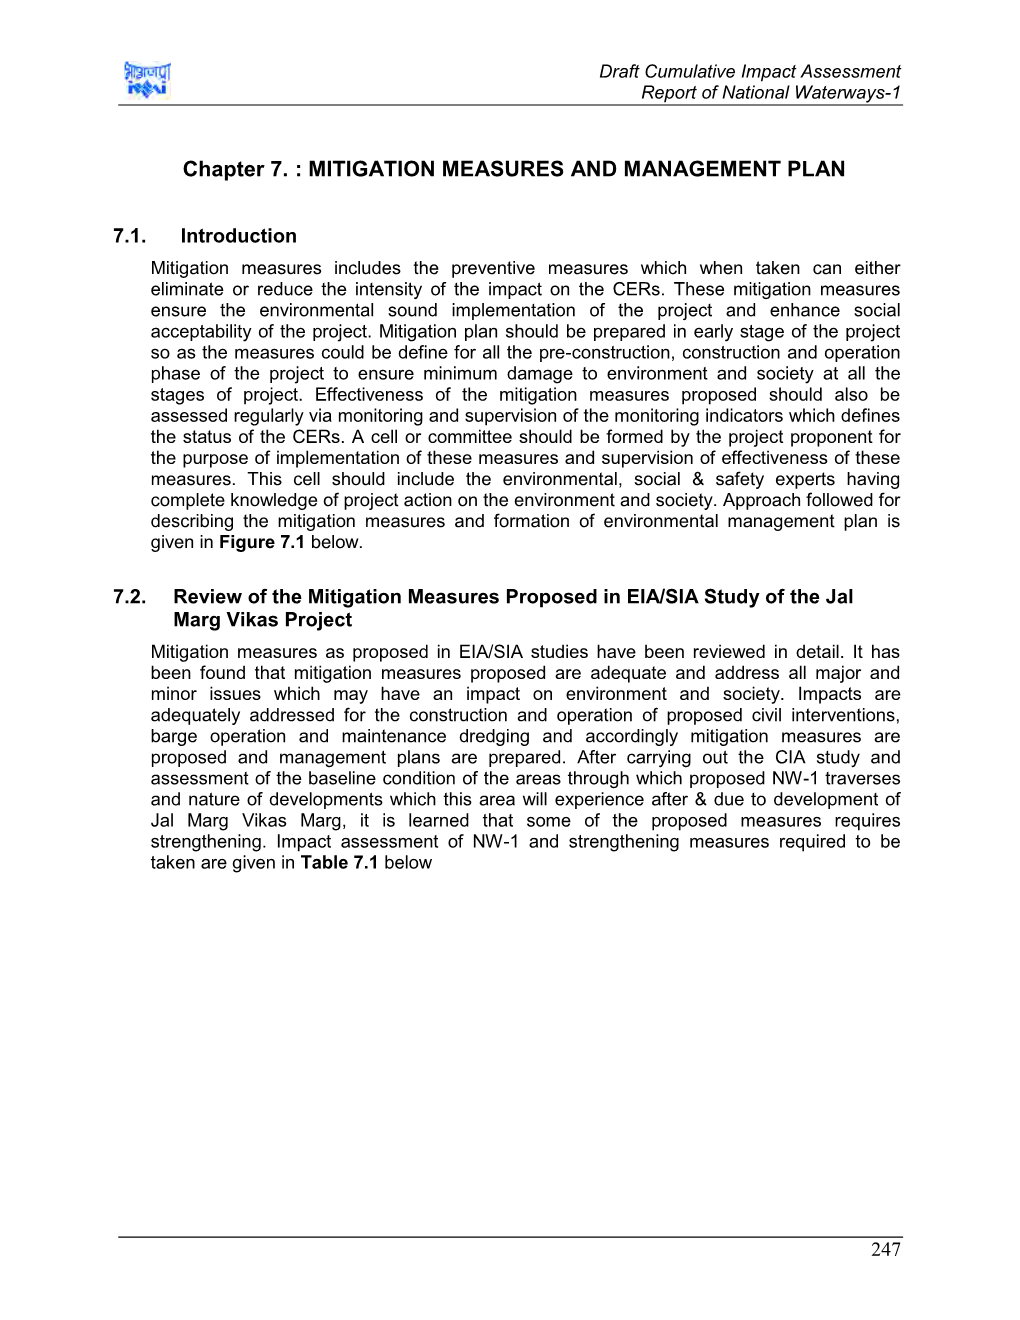 Chapter 7. : MITIGATION MEASURES and MANAGEMENT PLAN